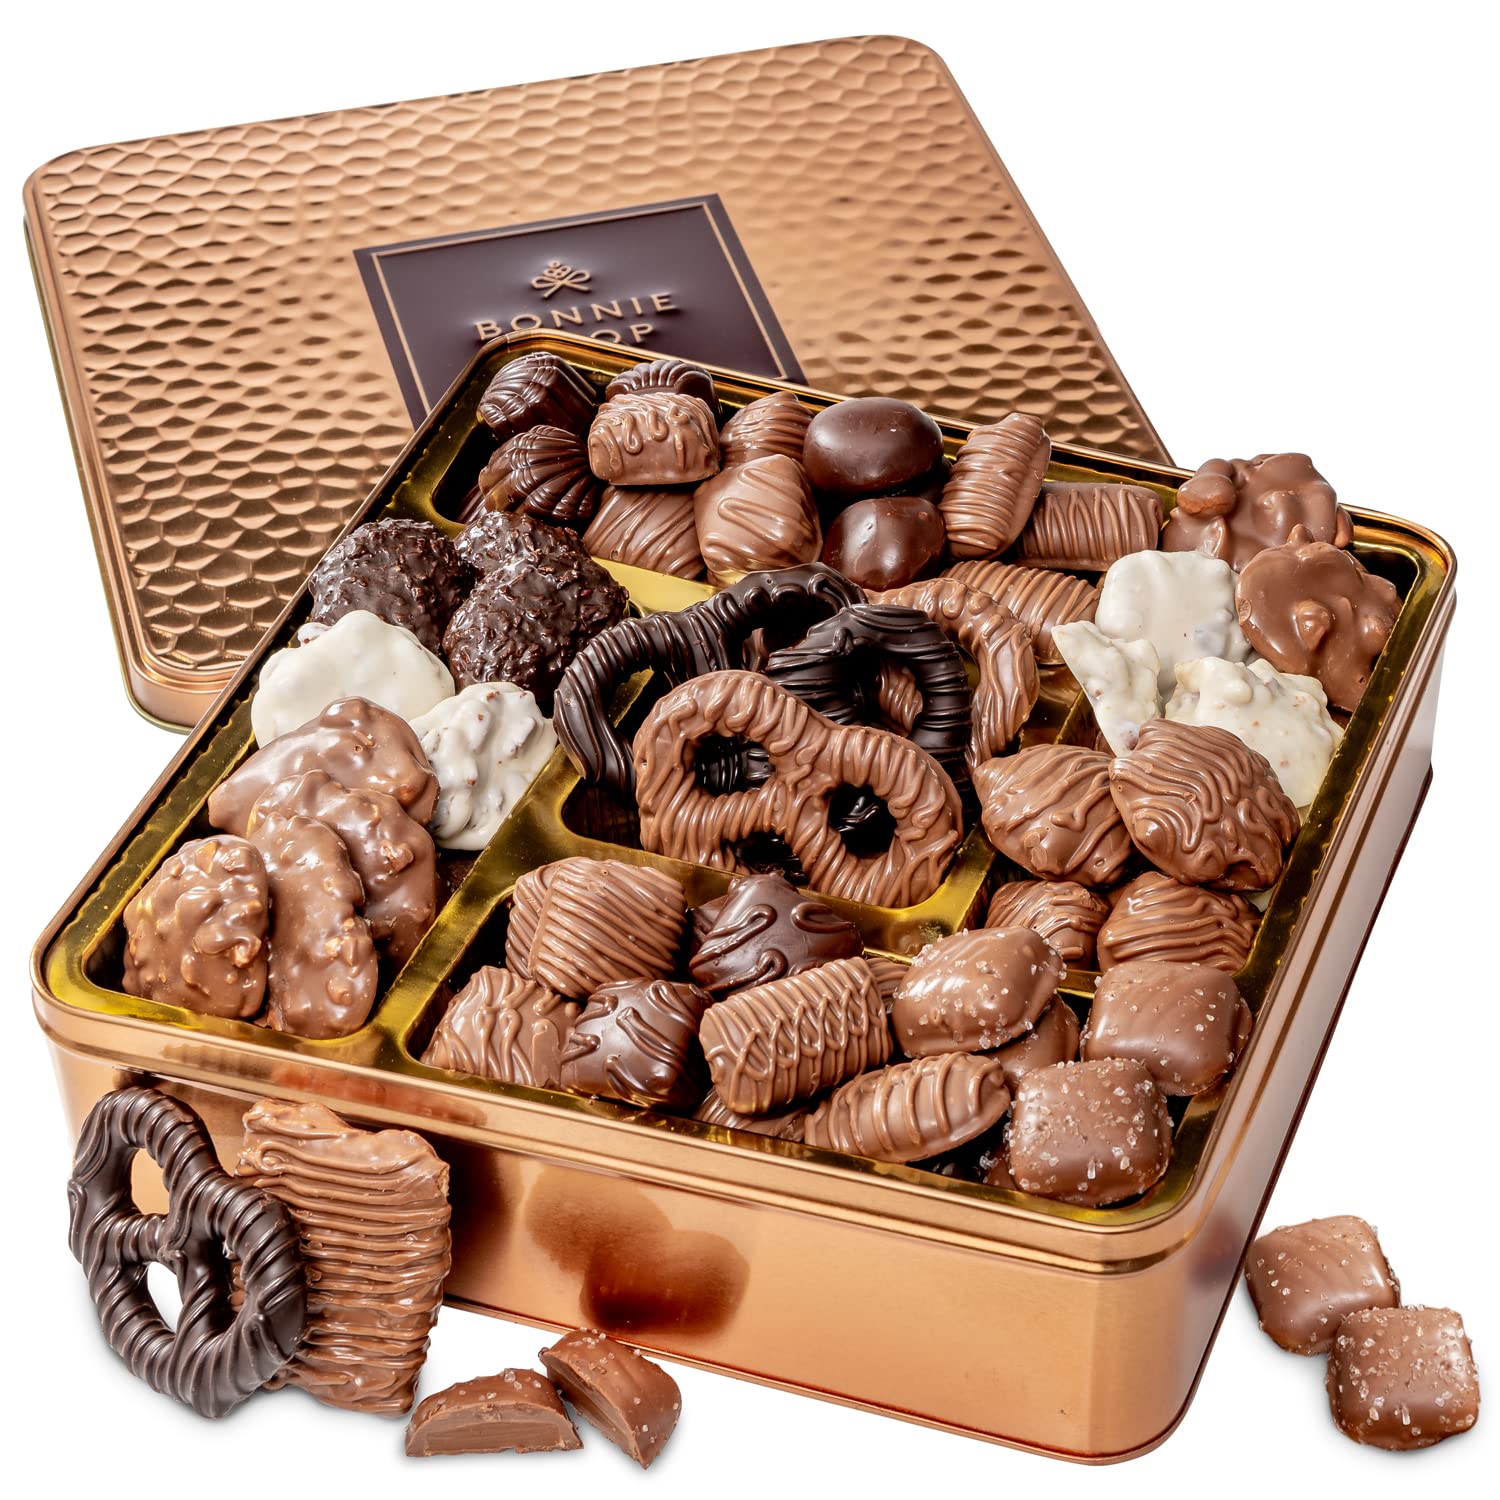 Lindt Gourmet Chocolate Candy Truffles Gift Box - 14.7 Oz. : Target